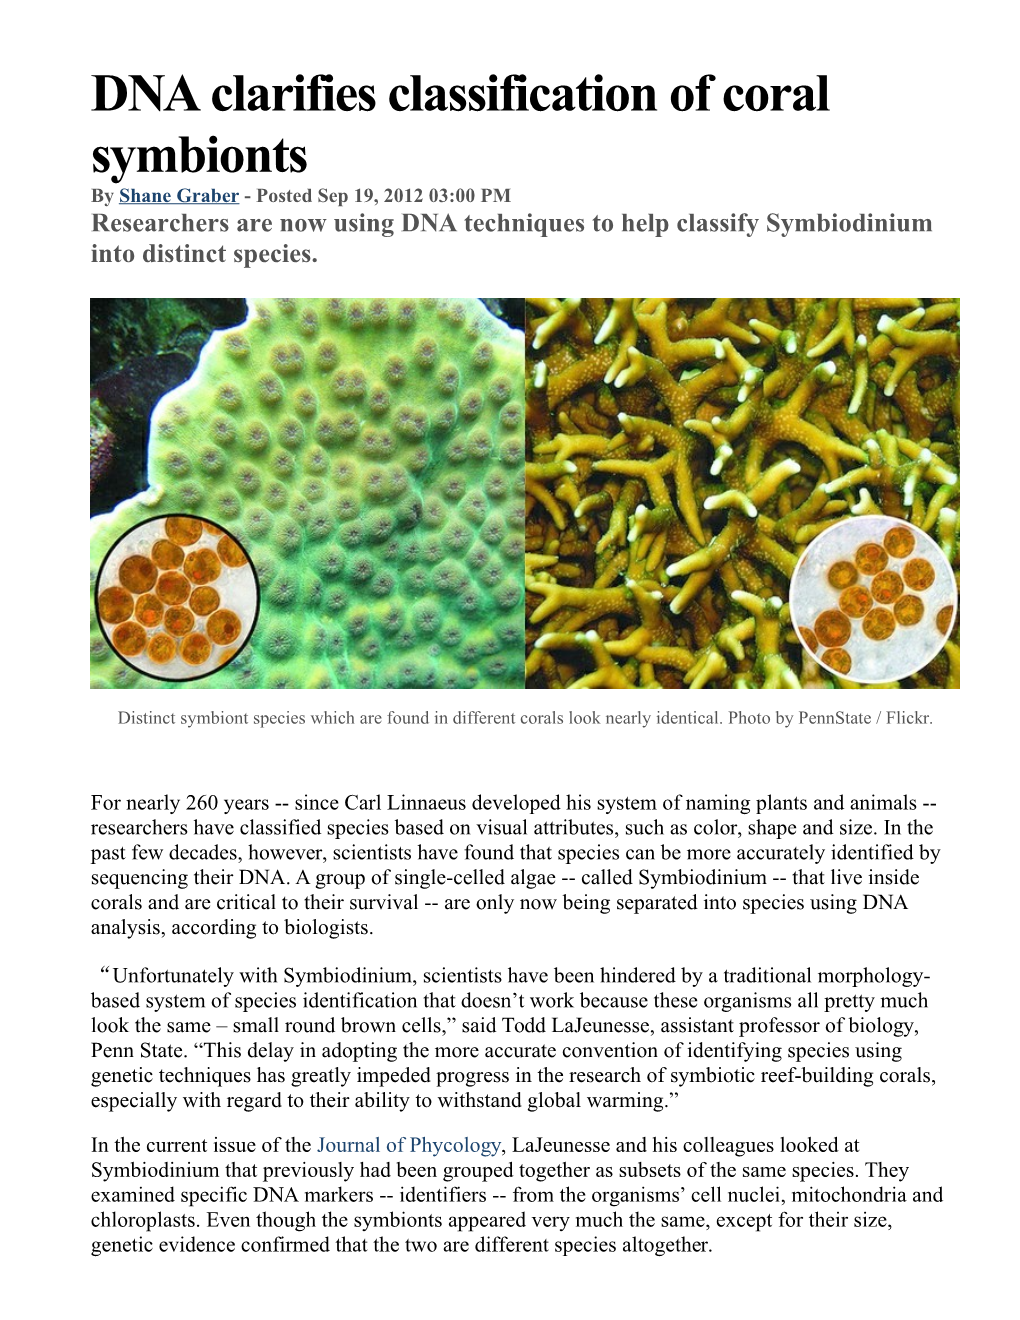 DNA Clarifies Classification of Coral Symbionts